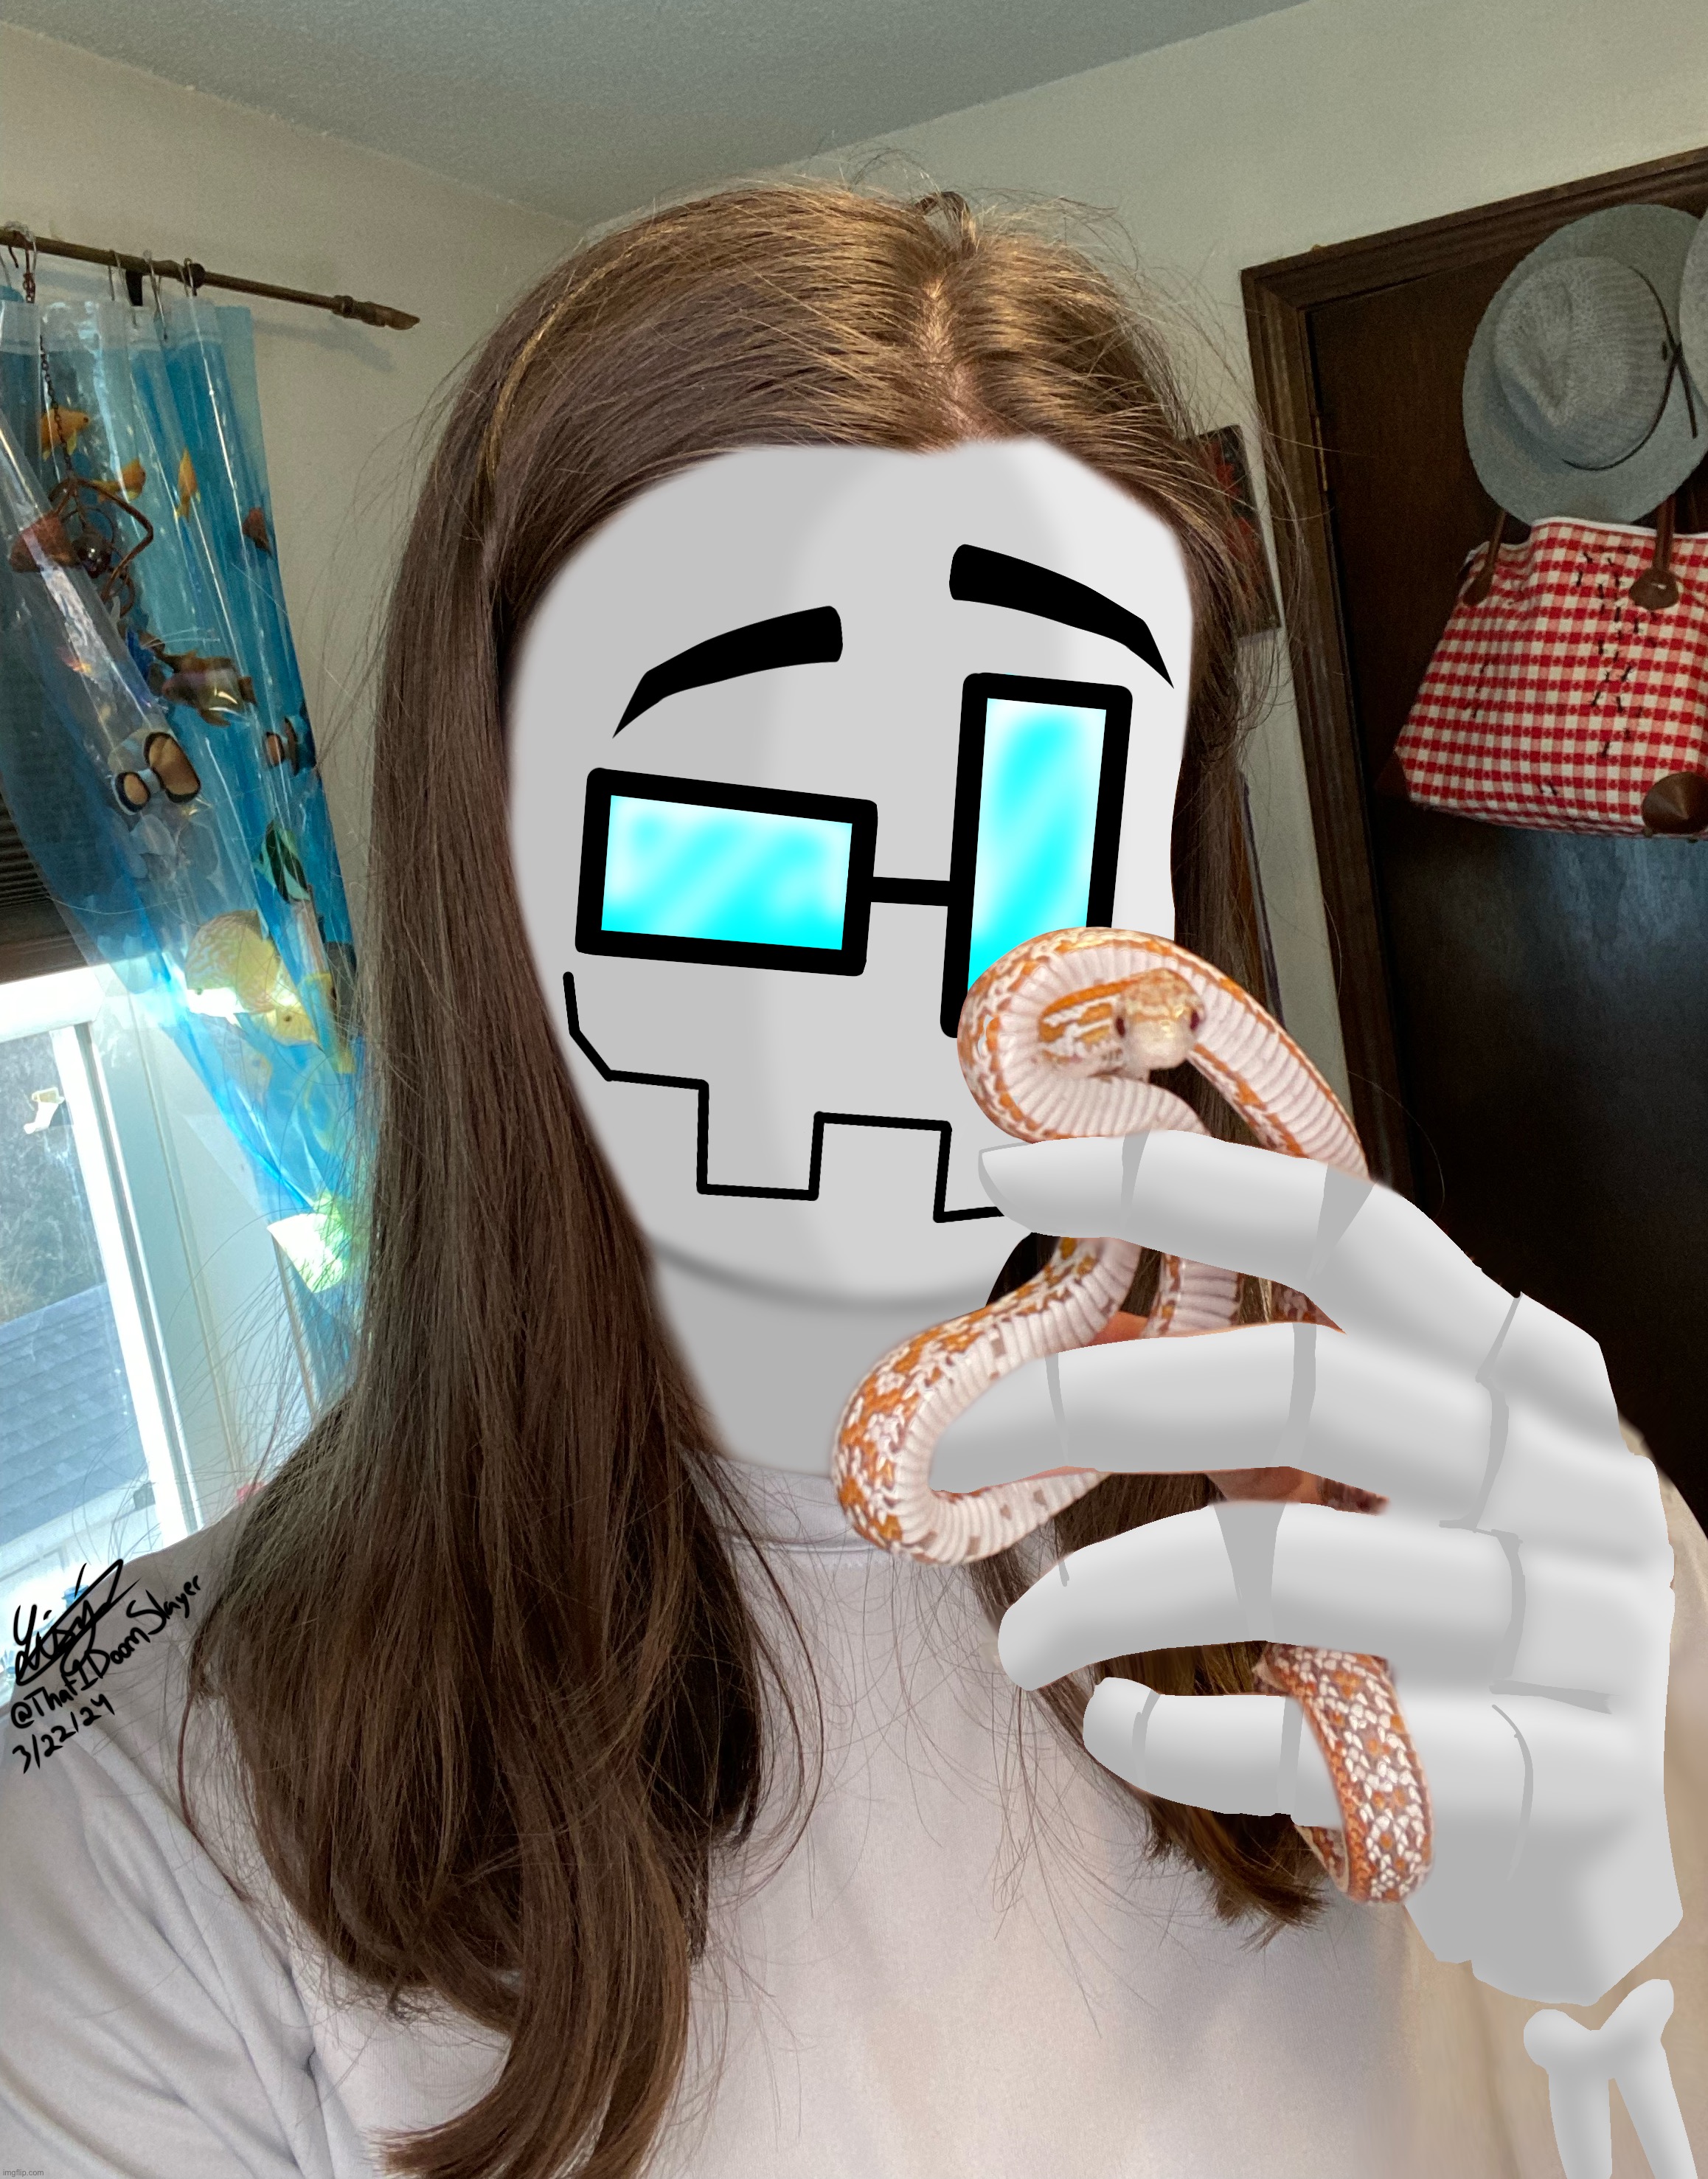 me n my goofy ahhh snake boi, forgor to post this yesterday | image tagged in goofy ahh,digital art,snake,yippee | made w/ Imgflip meme maker